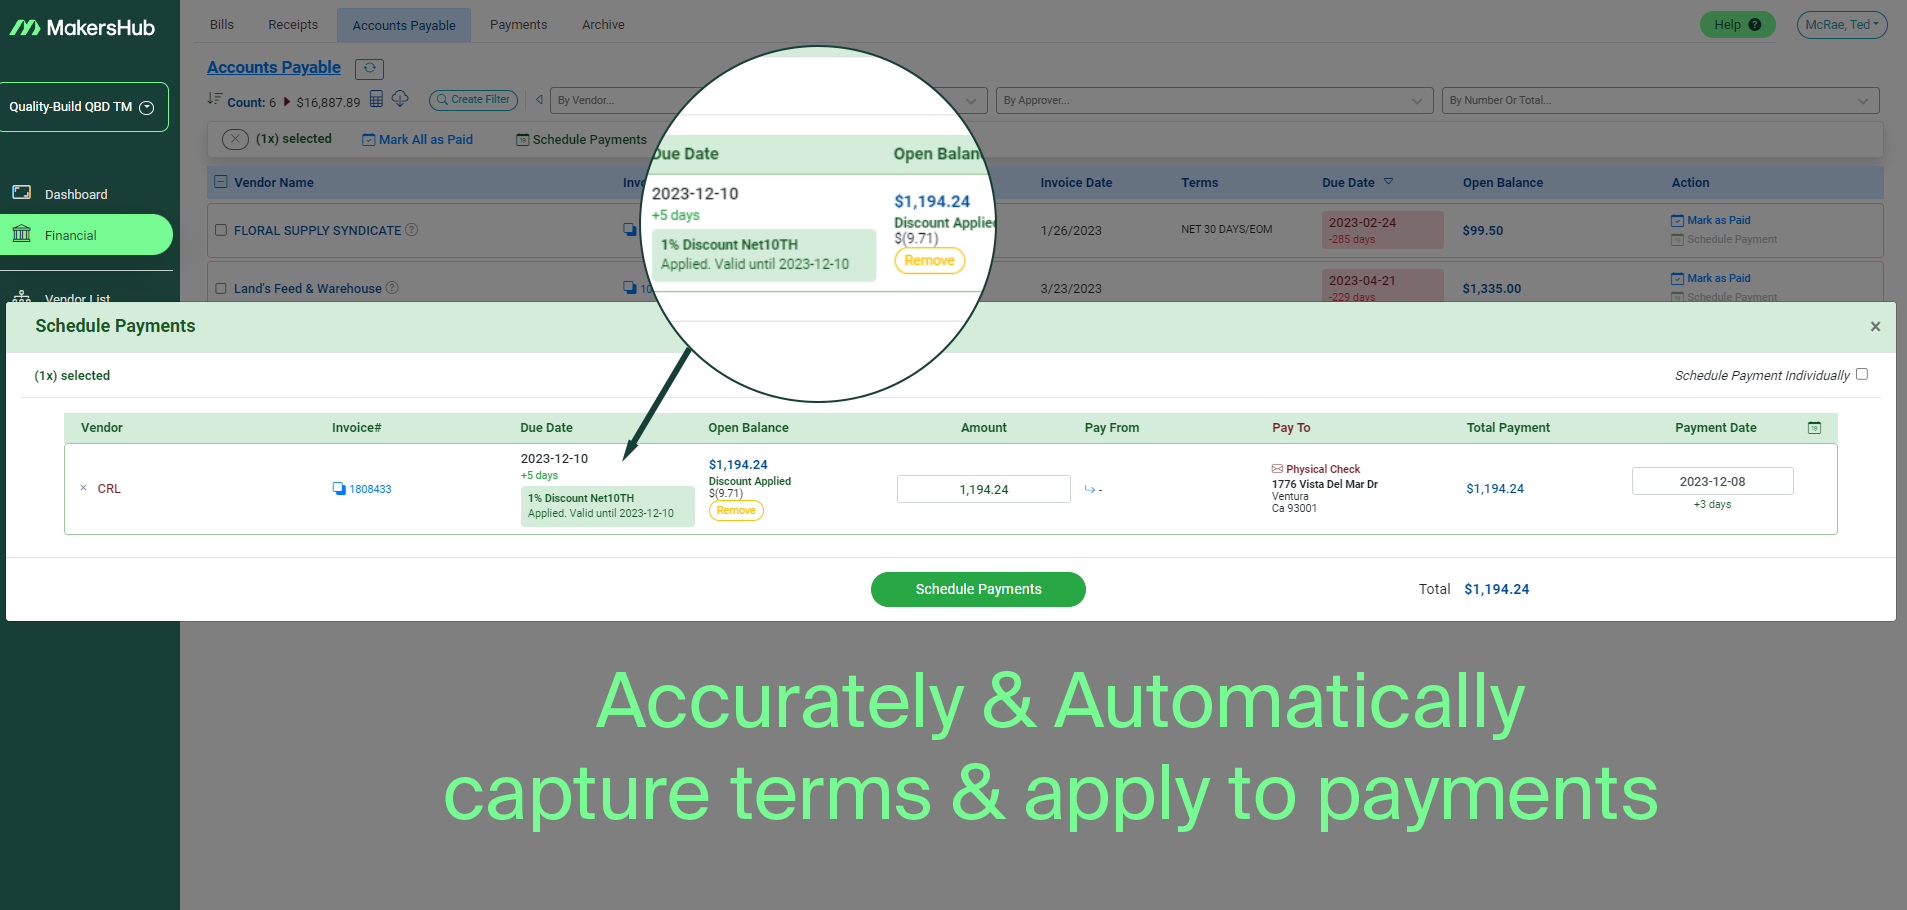 WiseVision: Accurately & Automatically captures terms & applies to payments.